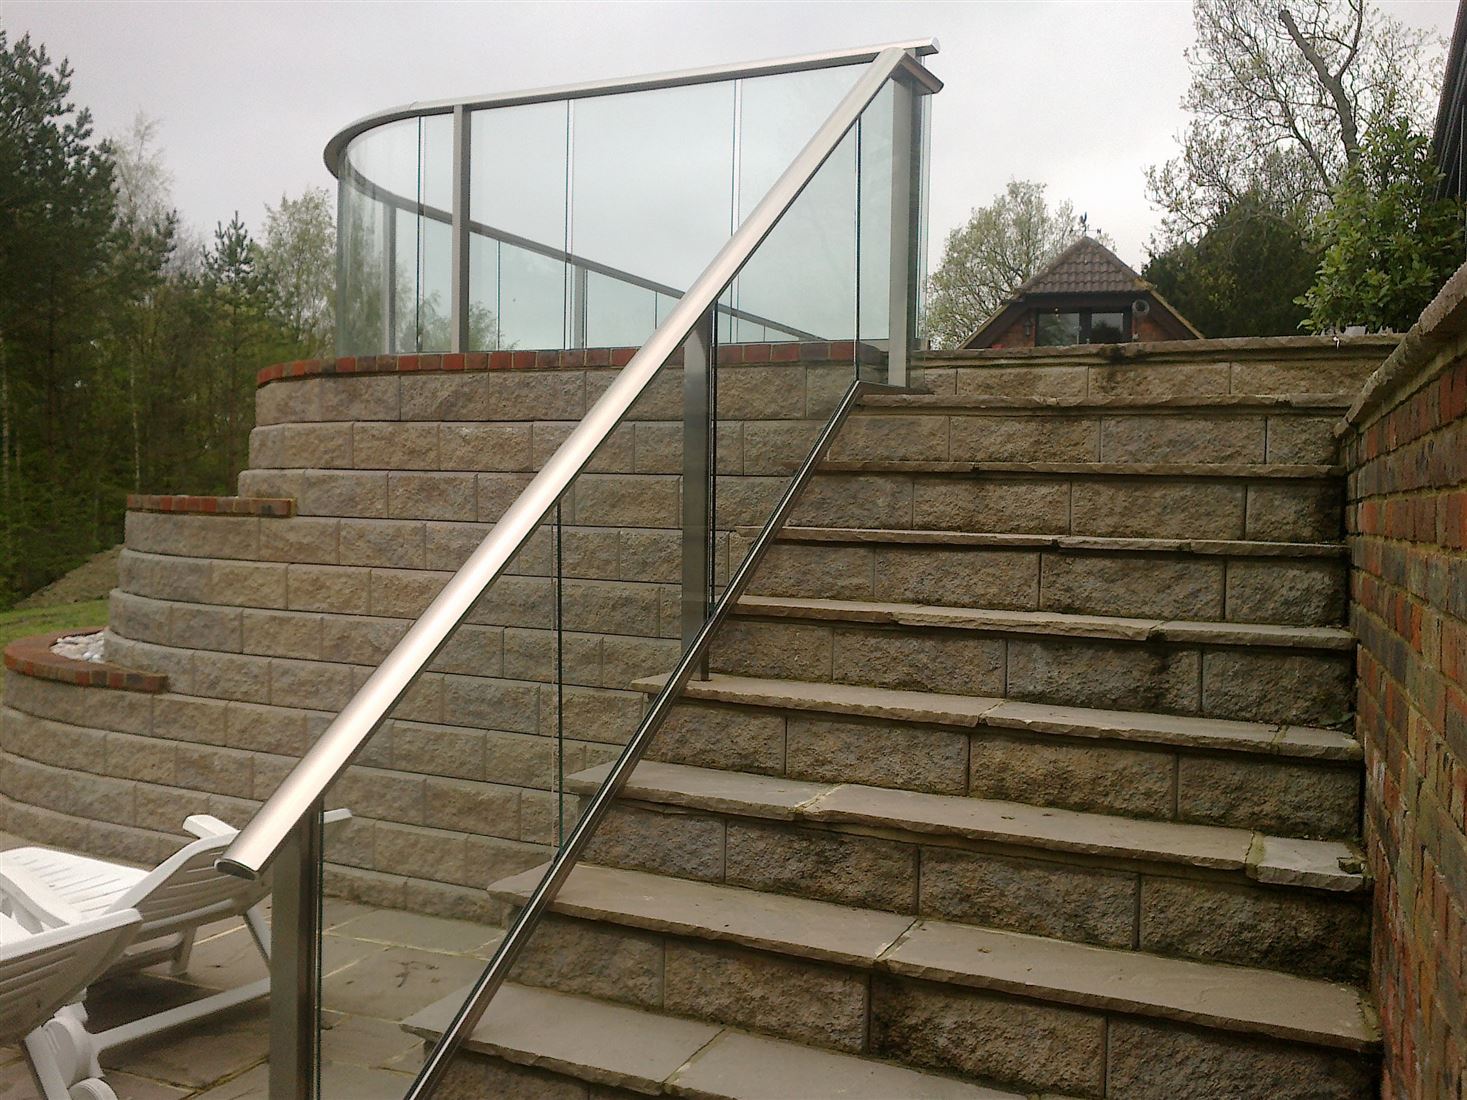 Glass Stair Railings | Glass balustrades on stairs | Glass ...